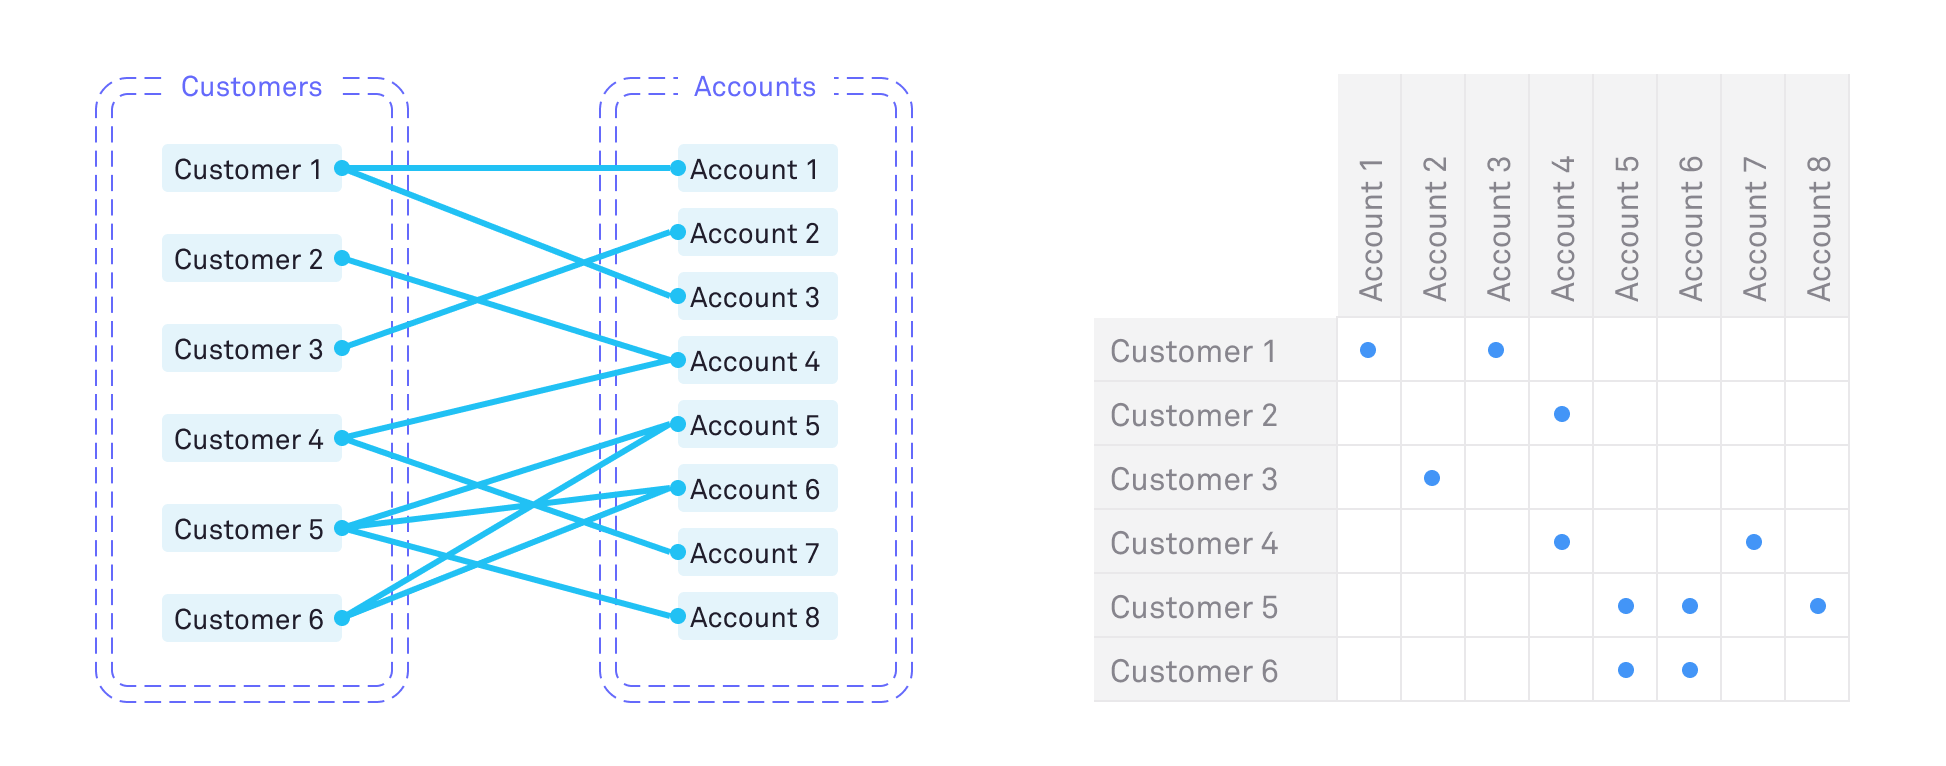 Example many-to-many relation between customers and accounts with joint ownership